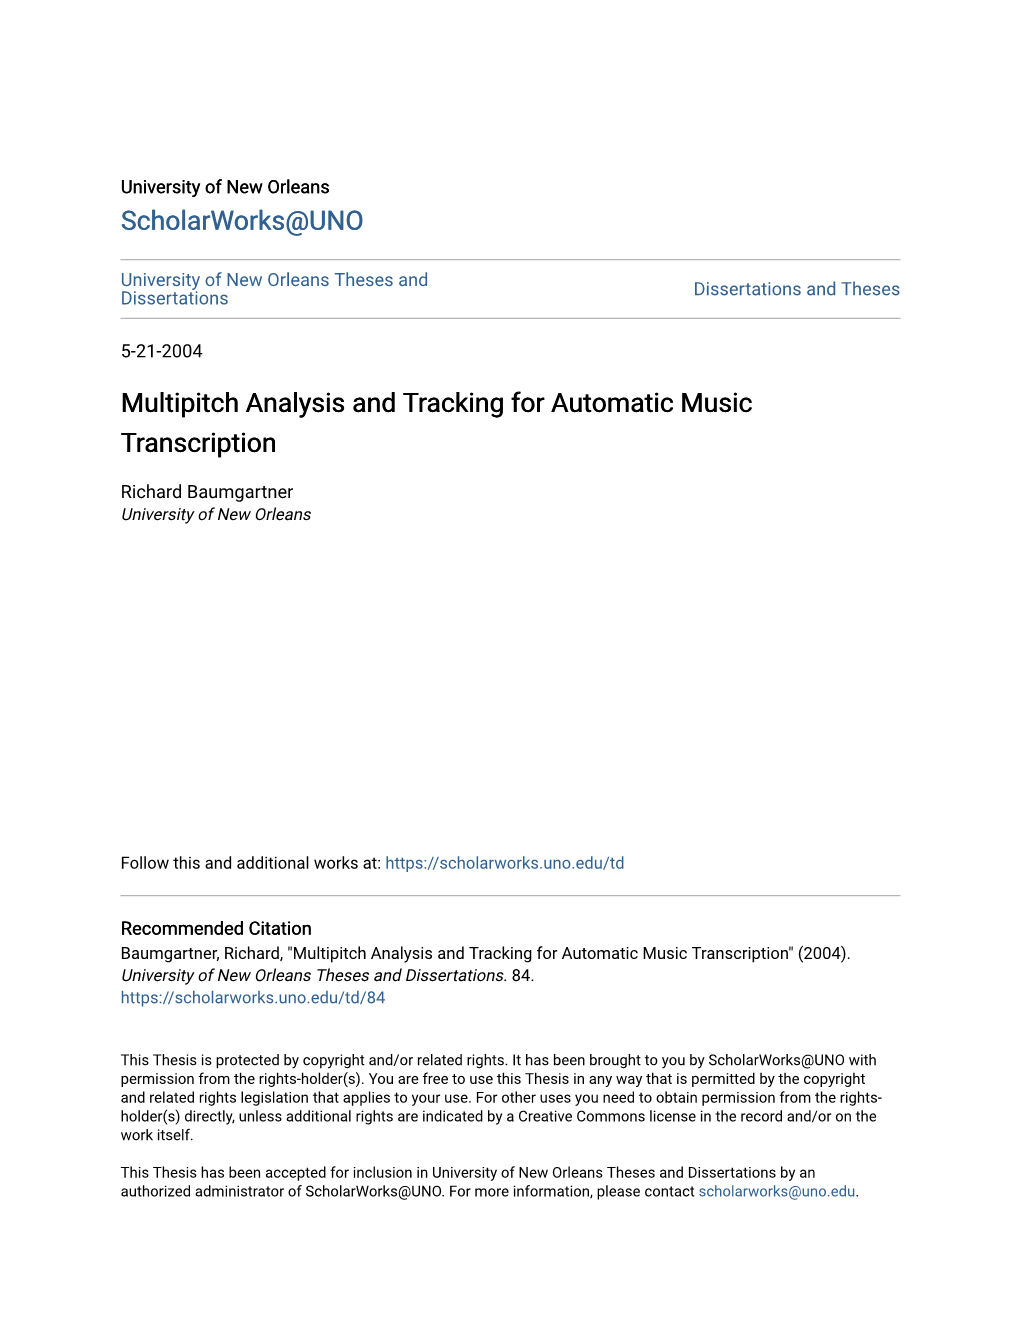 Multipitch Analysis and Tracking for Automatic Music Transcription